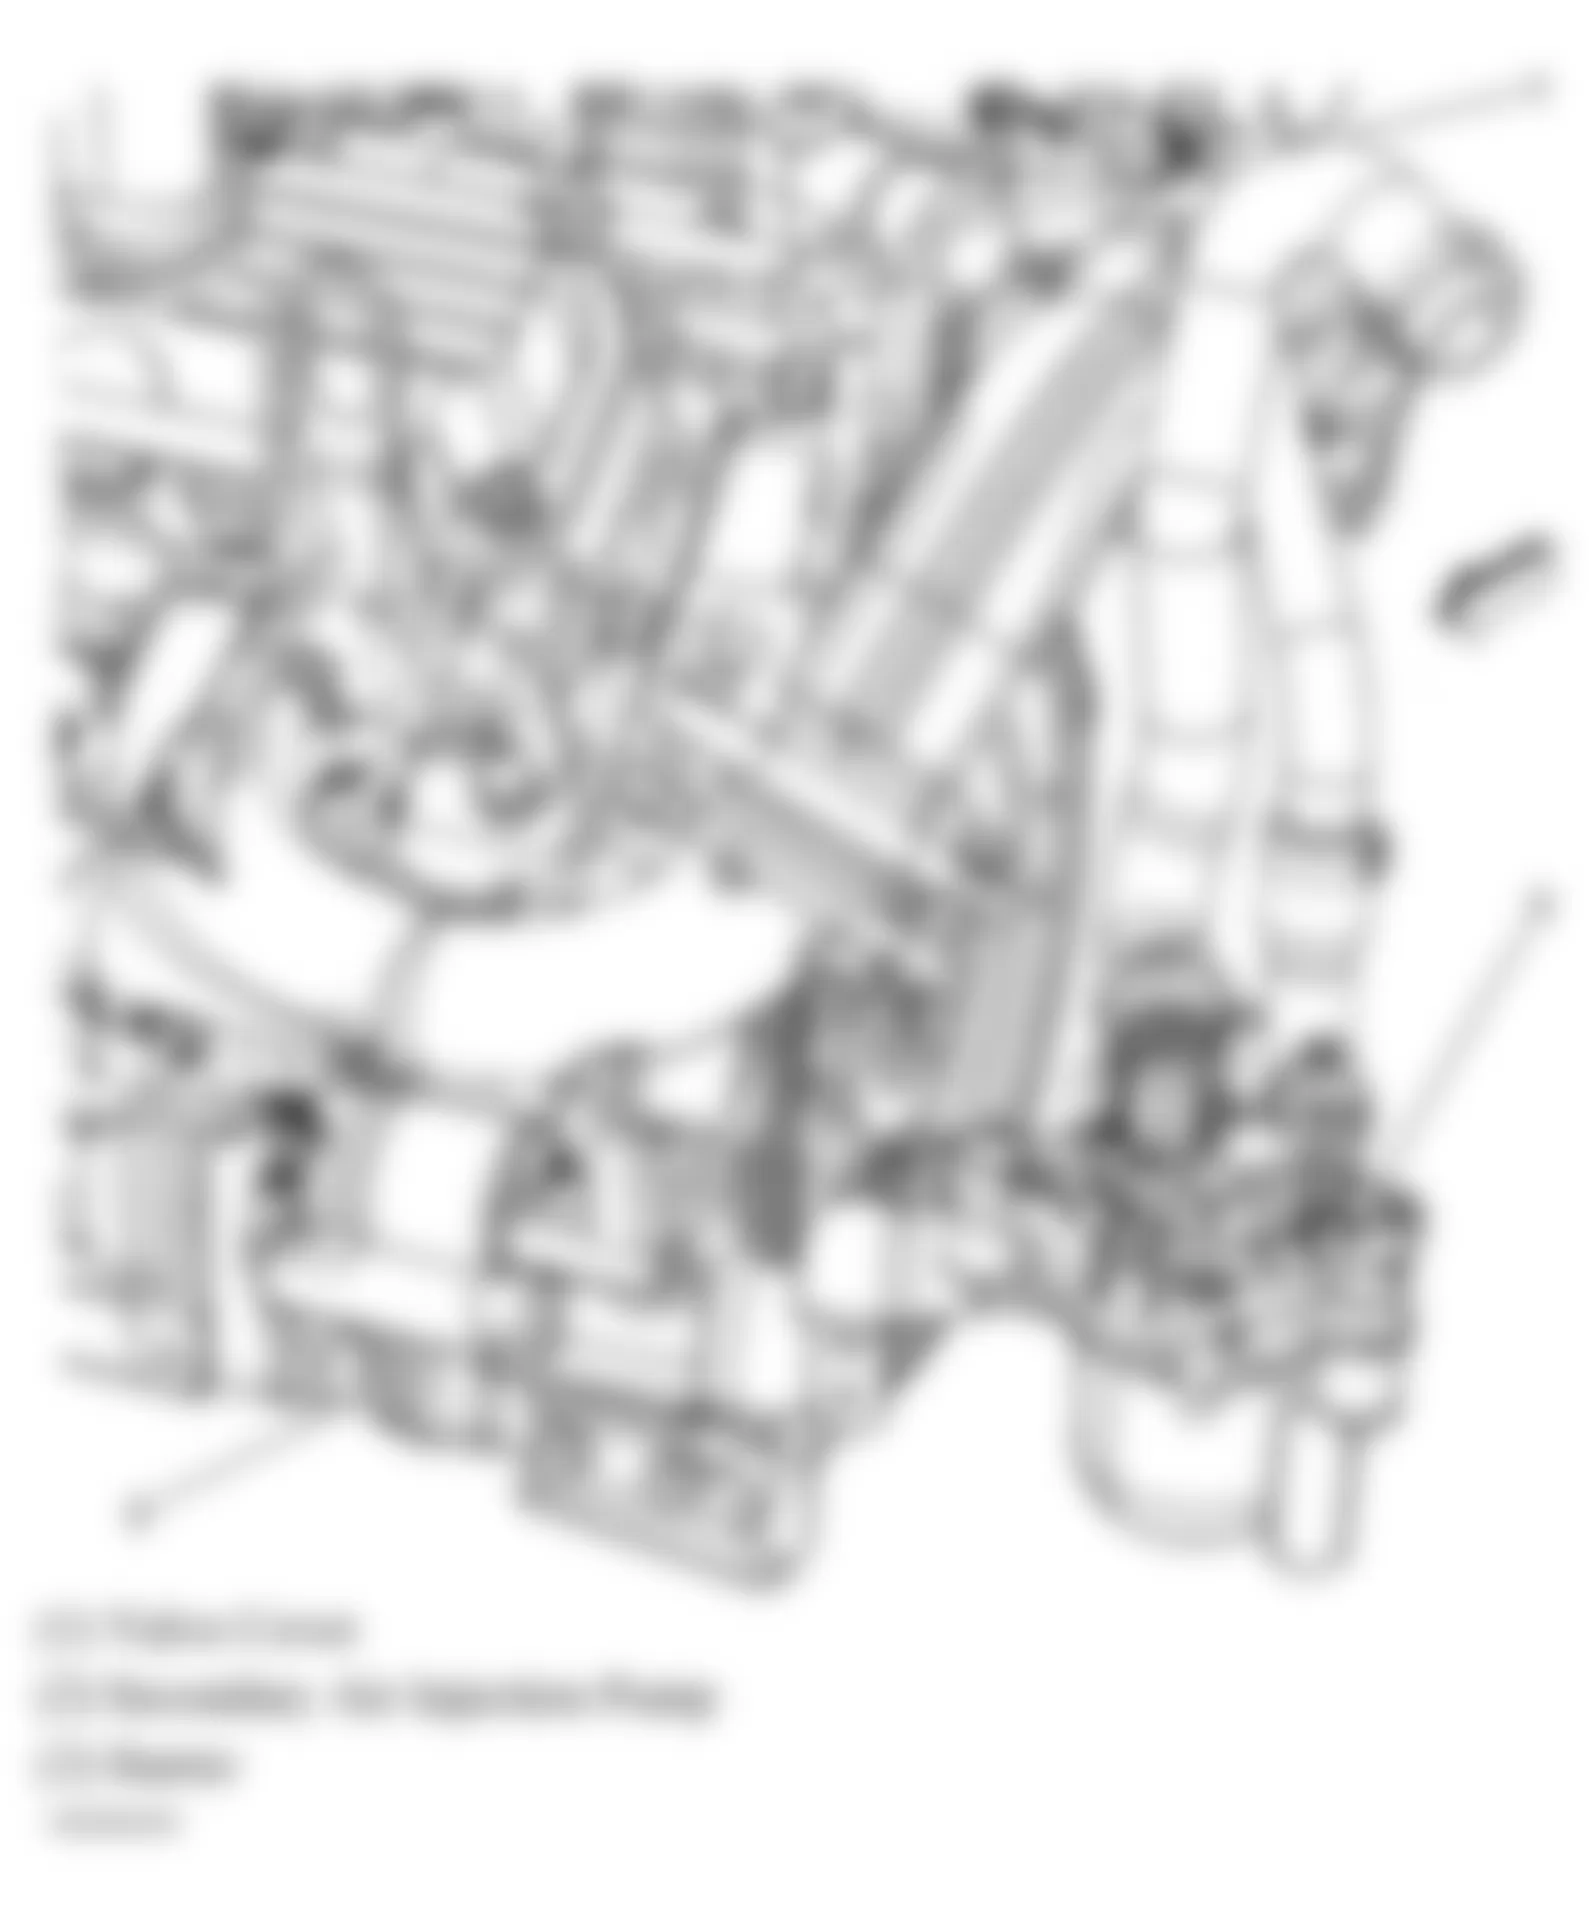 Buick Allure CXS 2008 - Component Locations -  Left Rear Of Engine (3.8L)